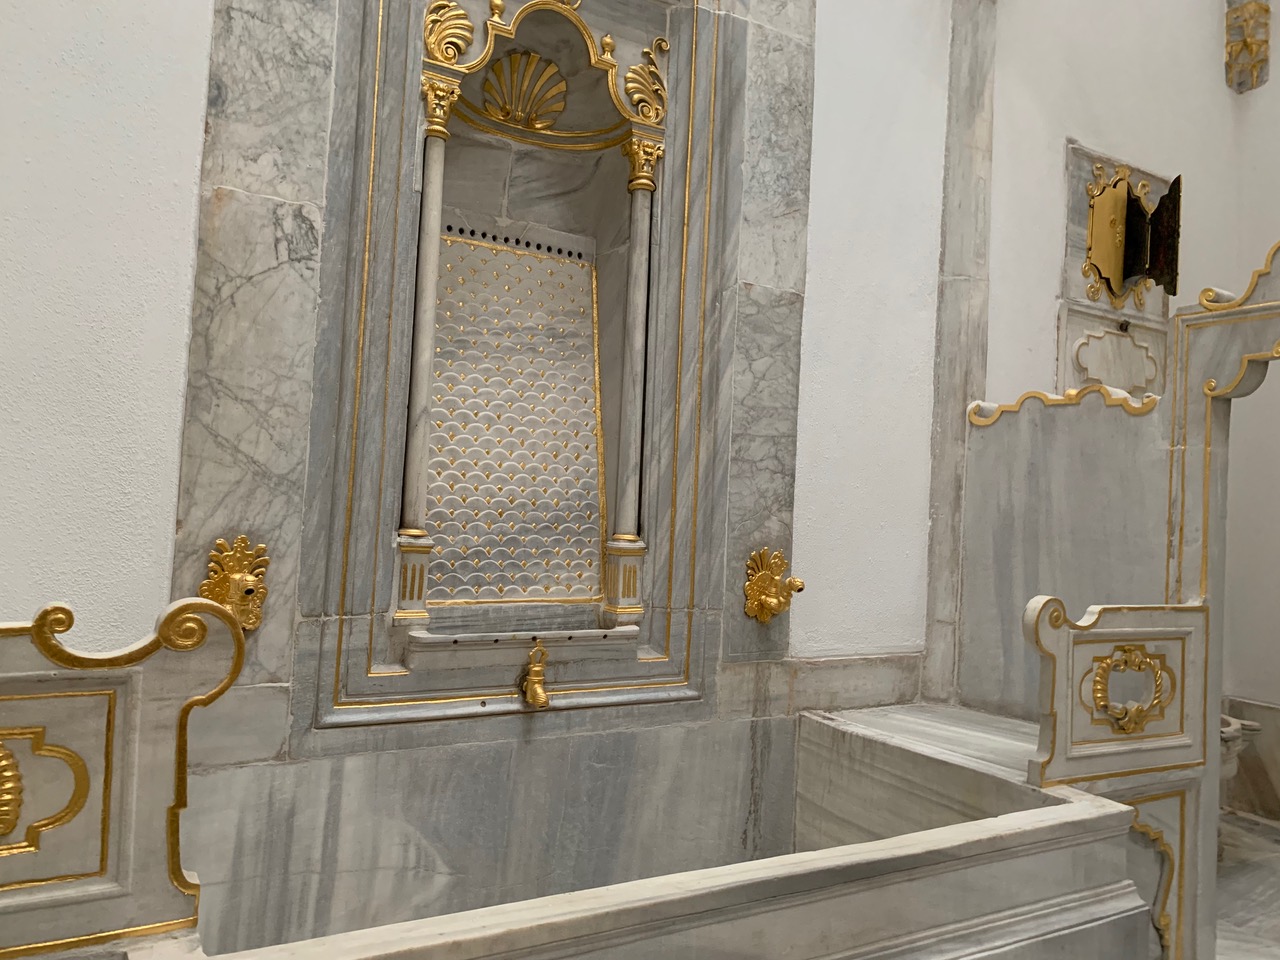 A marble and gold alcove with a faucet and rectangular bathing pool